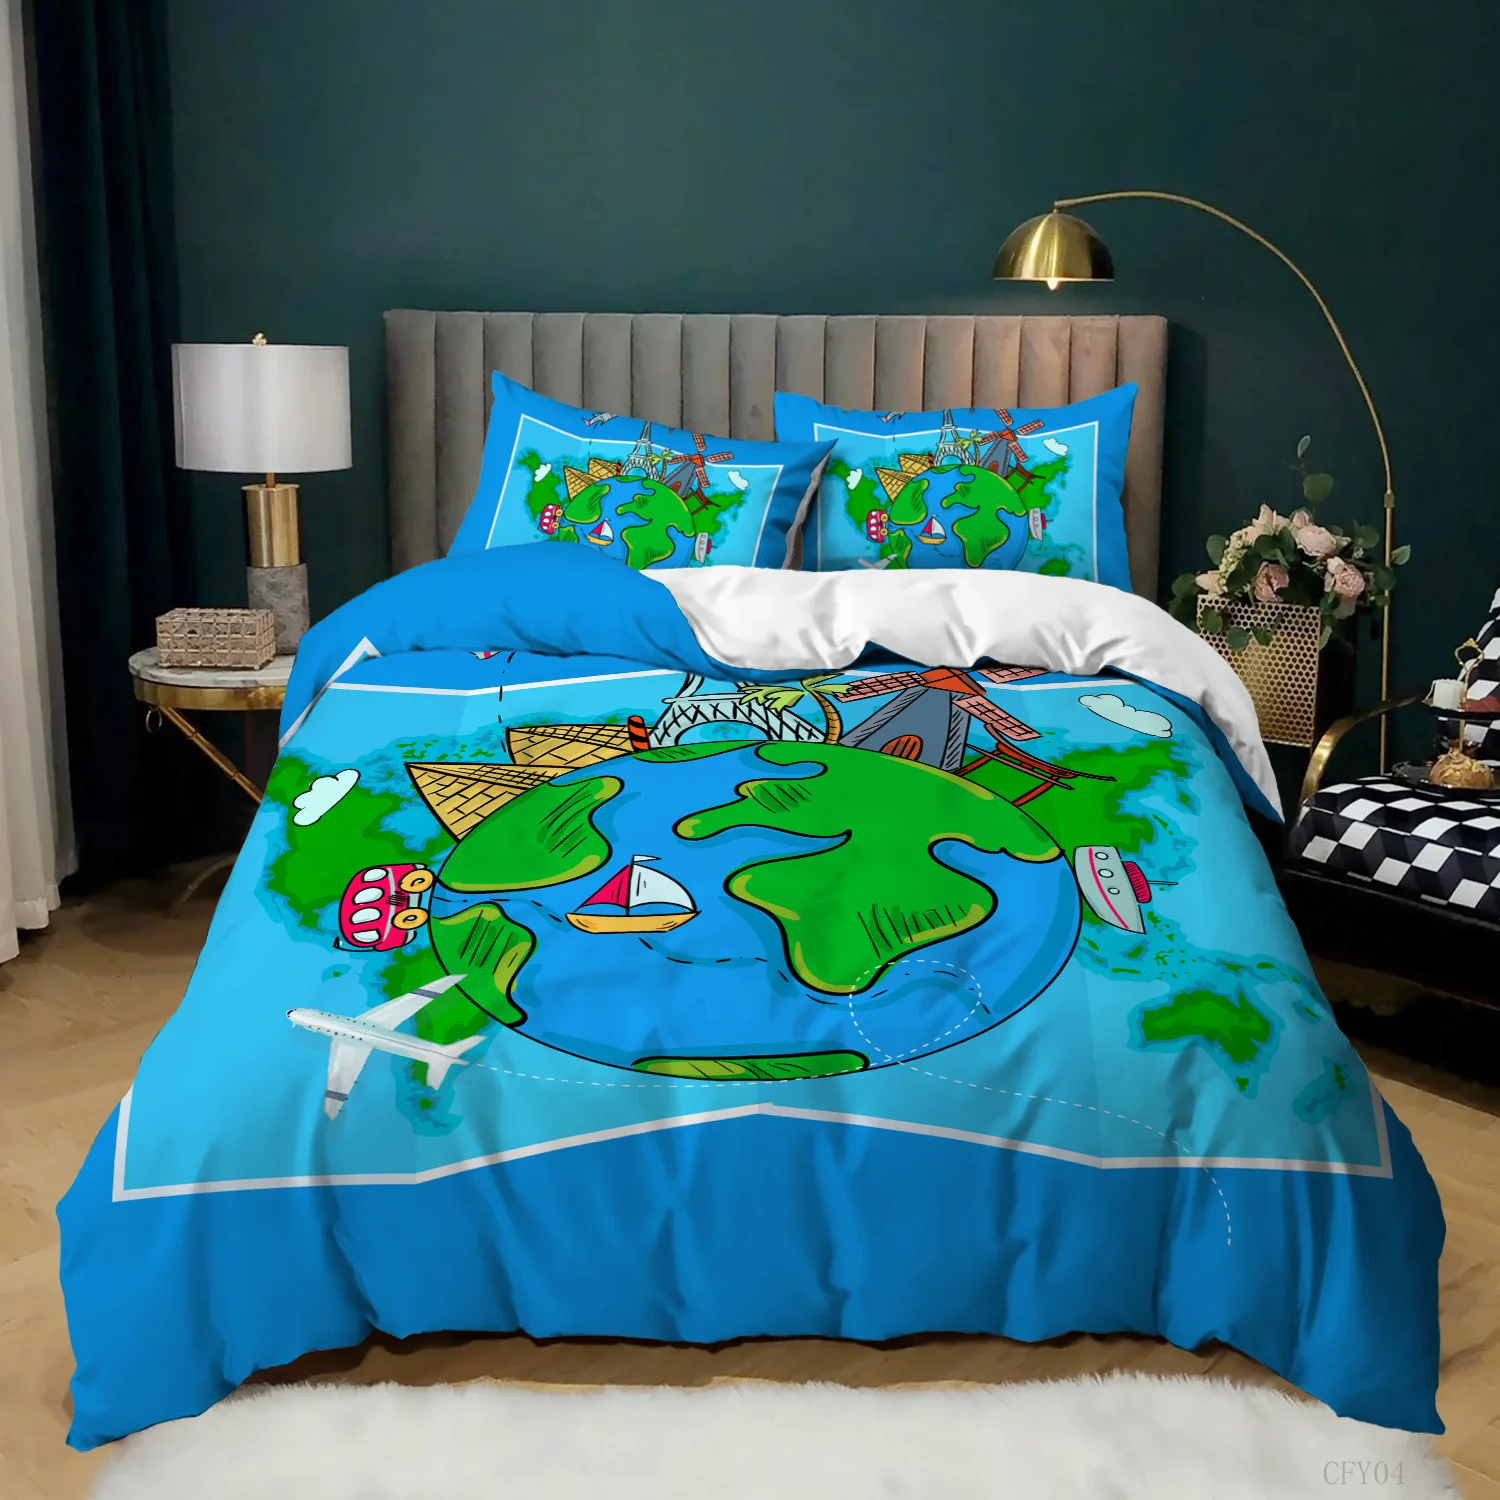 

Queen/King Size Bedding Set for Kids Teens Travel Theme Duvet Cover Cartoon Earth Print Comforter Cover Ultra Soft Quilt Cover